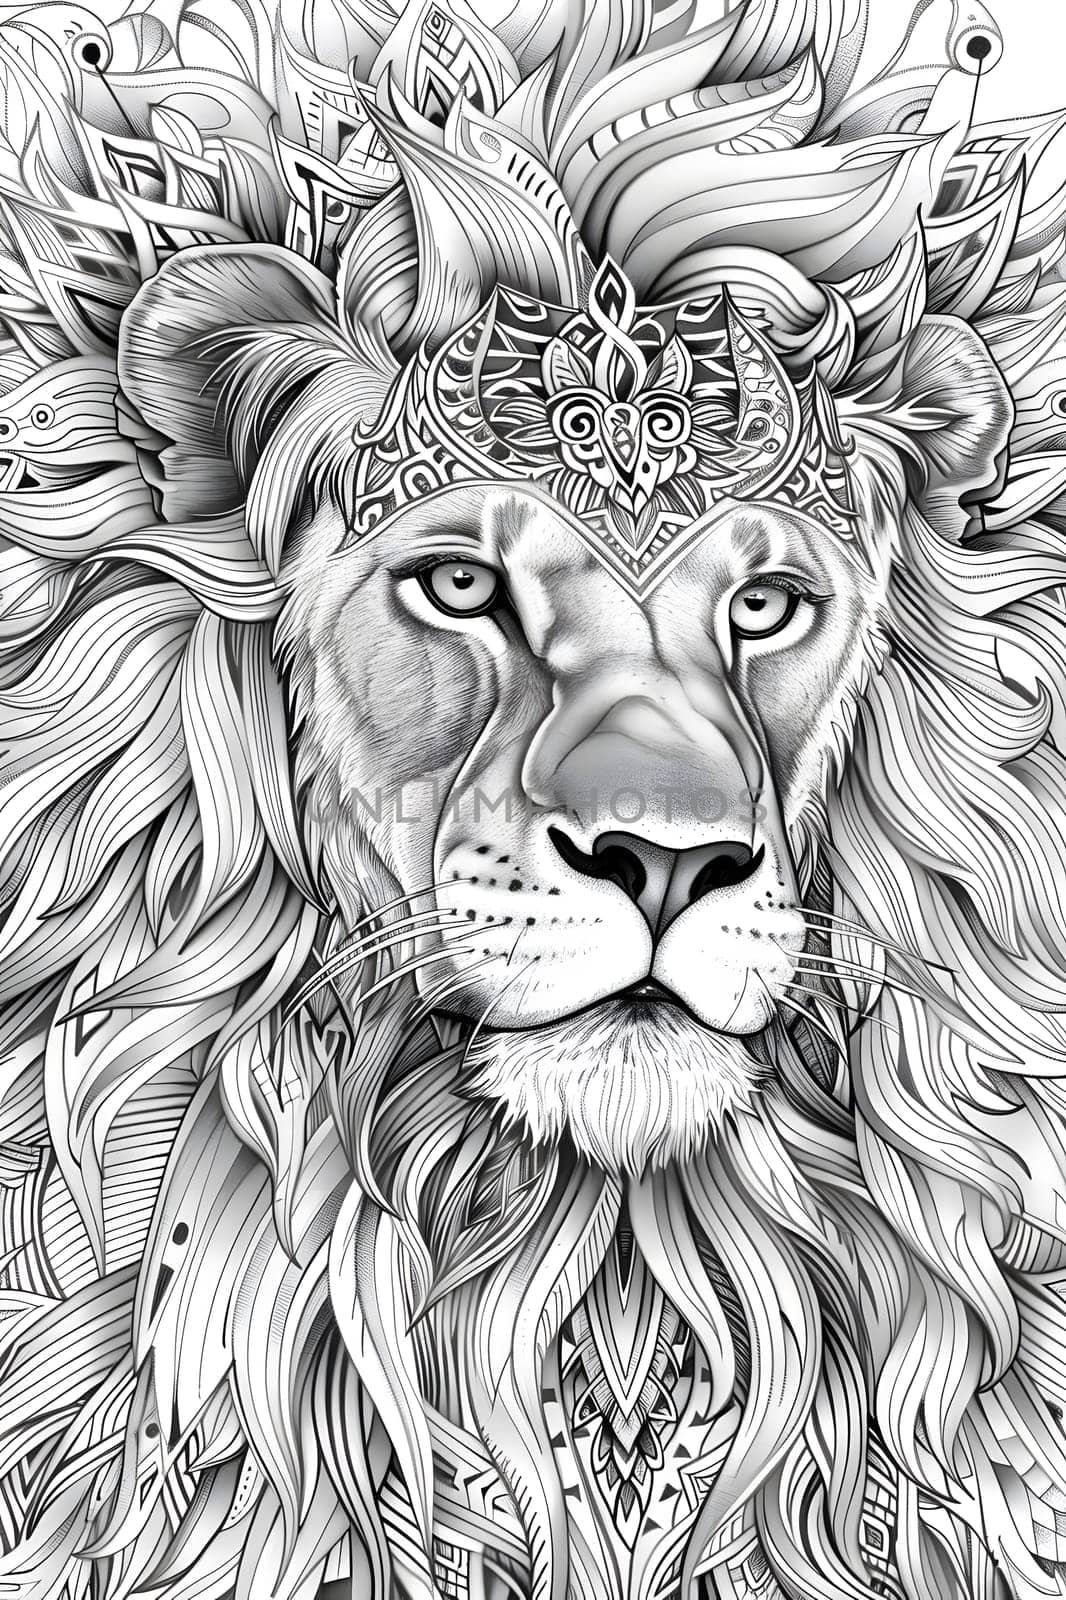 Monochrome drawing of a Masai lion with a crown, showcasing Felidae art style by Nadtochiy